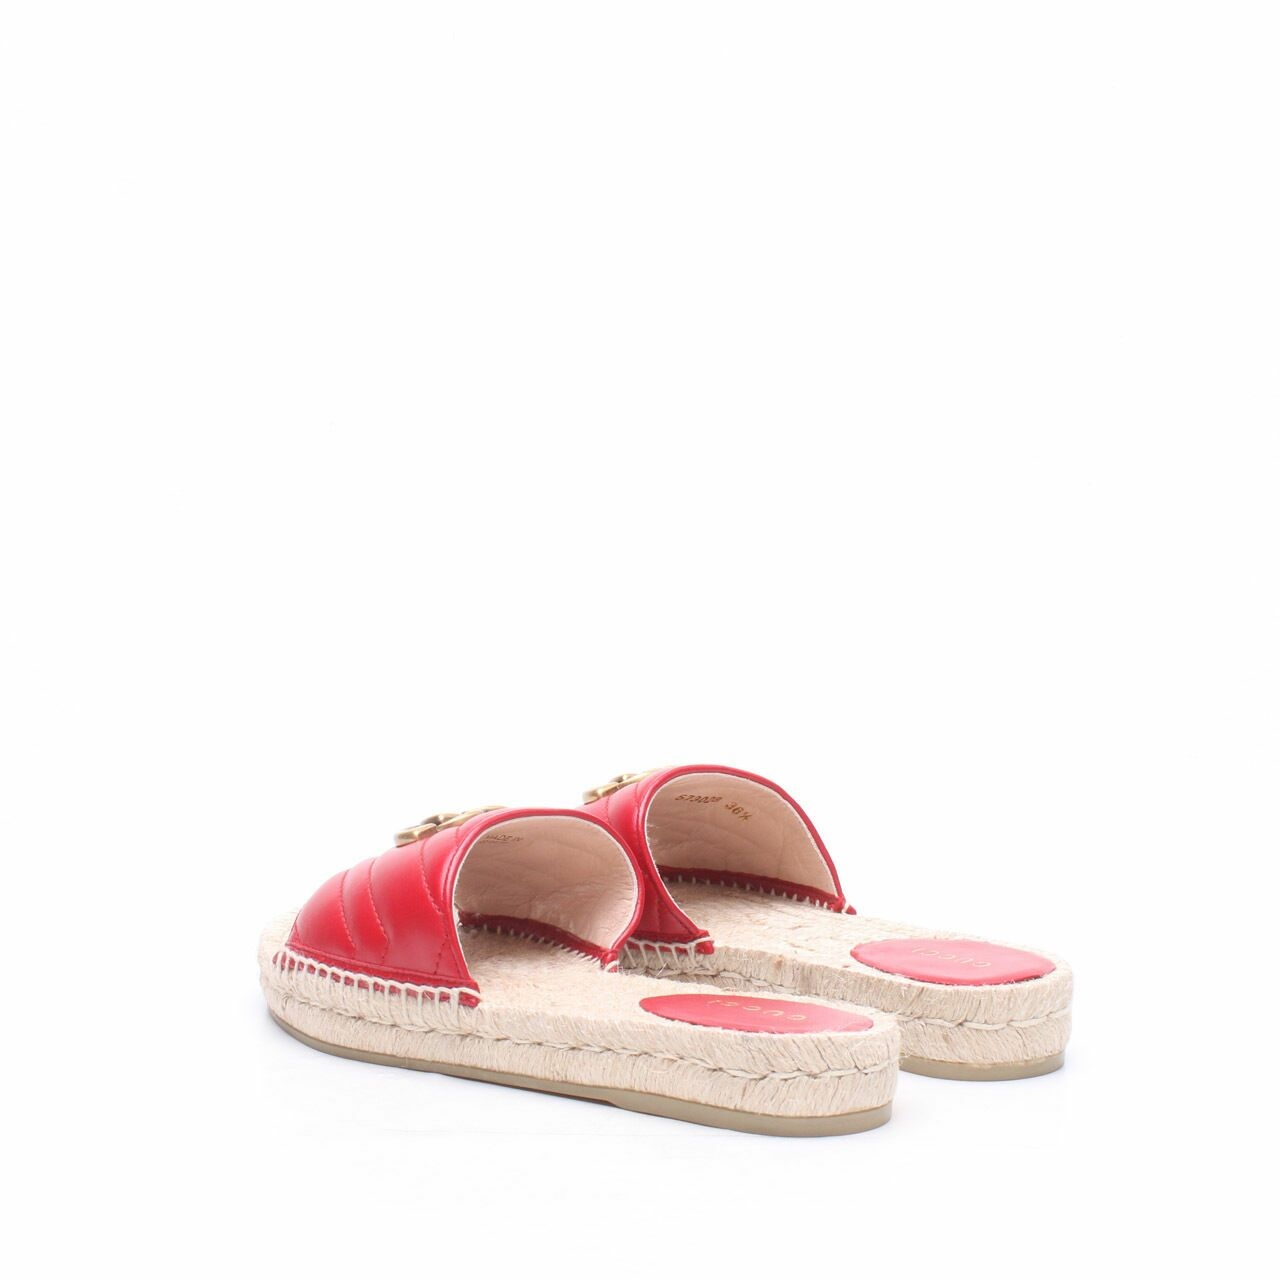 Gucci Nappa Leather Hibiscus Red Espadrille GG Marmont Slide Sandals